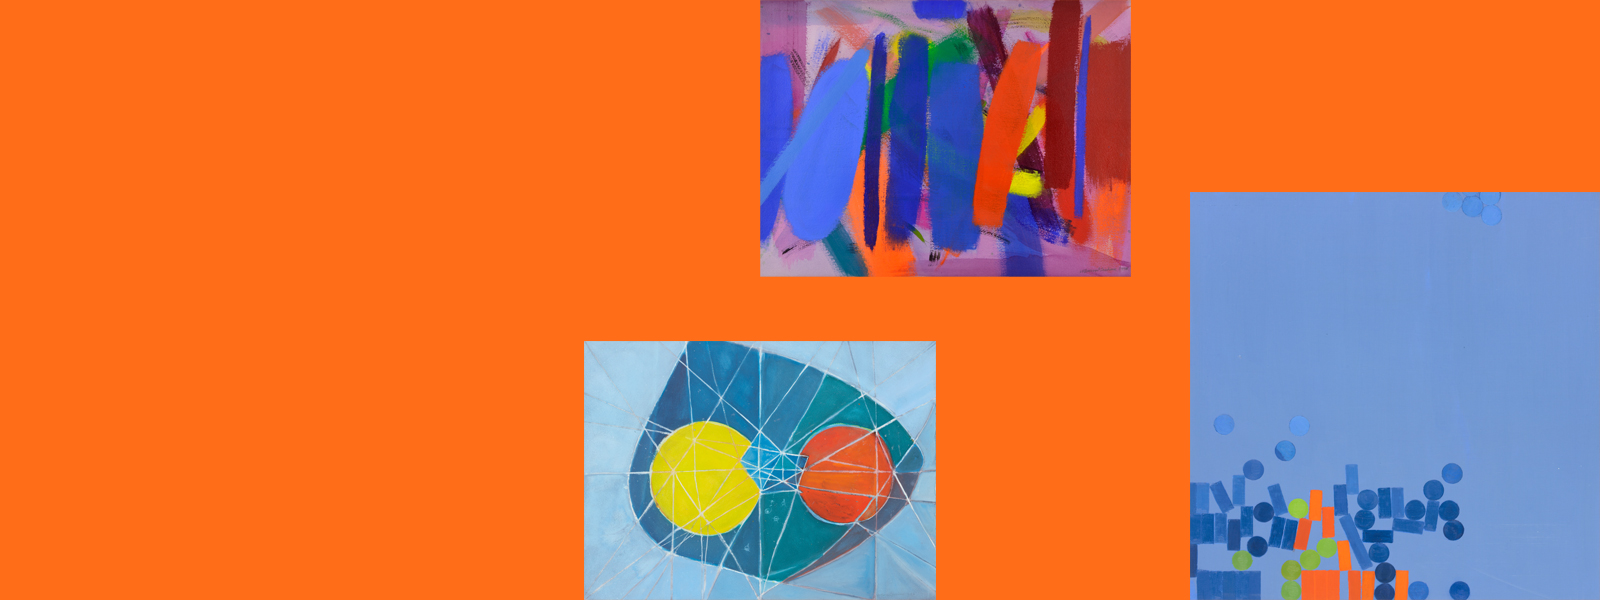 Three paintings grouped on an orange background. From left to right: an abstract composition of two circles in yellow and orange on a blue background with geometric crossing lines; an abstract composition of vertical brushstrokes in bright colours on a lilac background; an abstract composition of small rectangles and circles in blue, lime green and orange clustered in the bottom left corner on a blue background